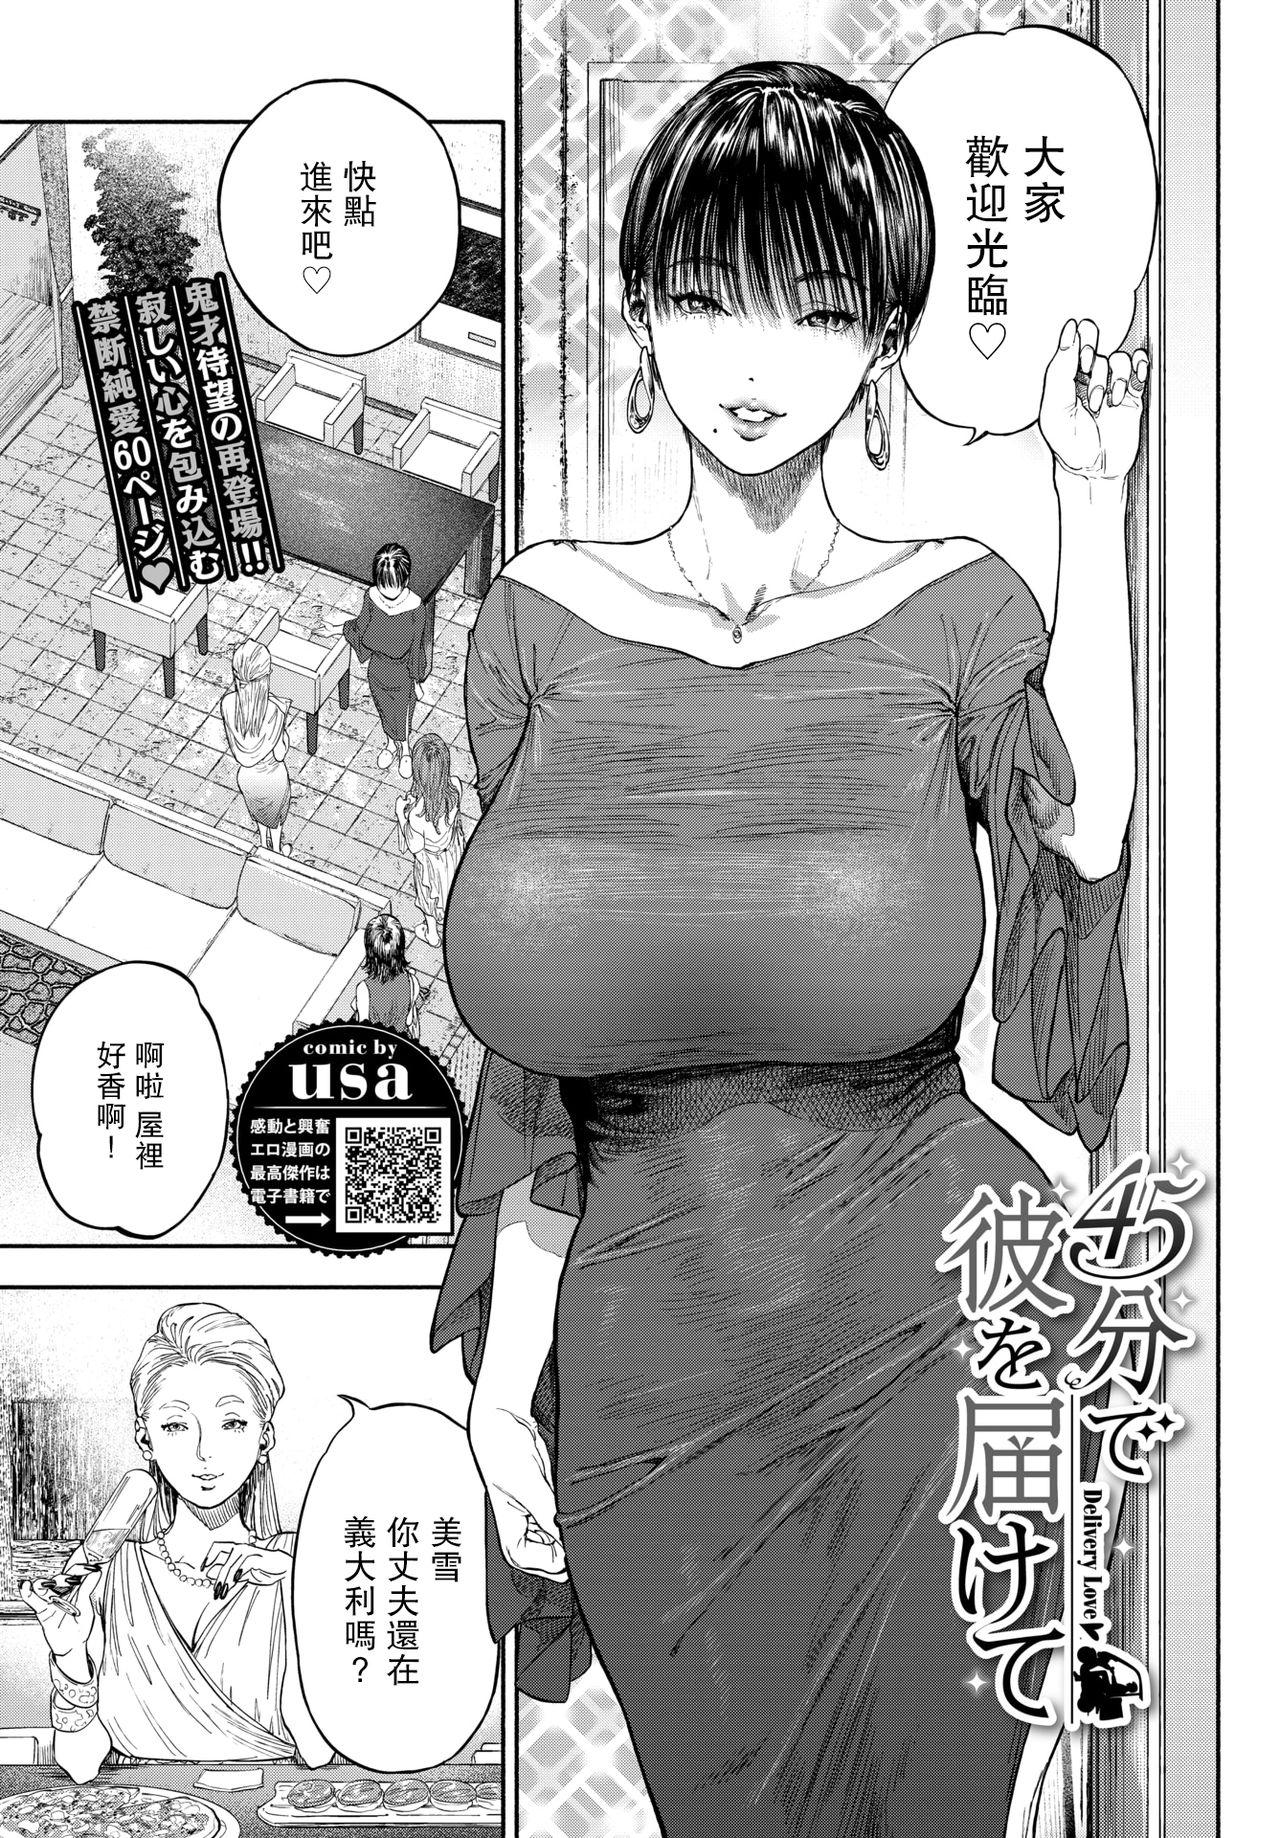 Natural Boobs [usa] 45-fun de Kare o Todokete - Delivery Love (COMIC BAVEL 2020-12) [Chinese] [路过的骑士汉化组] [Digital] Salope - Picture 1